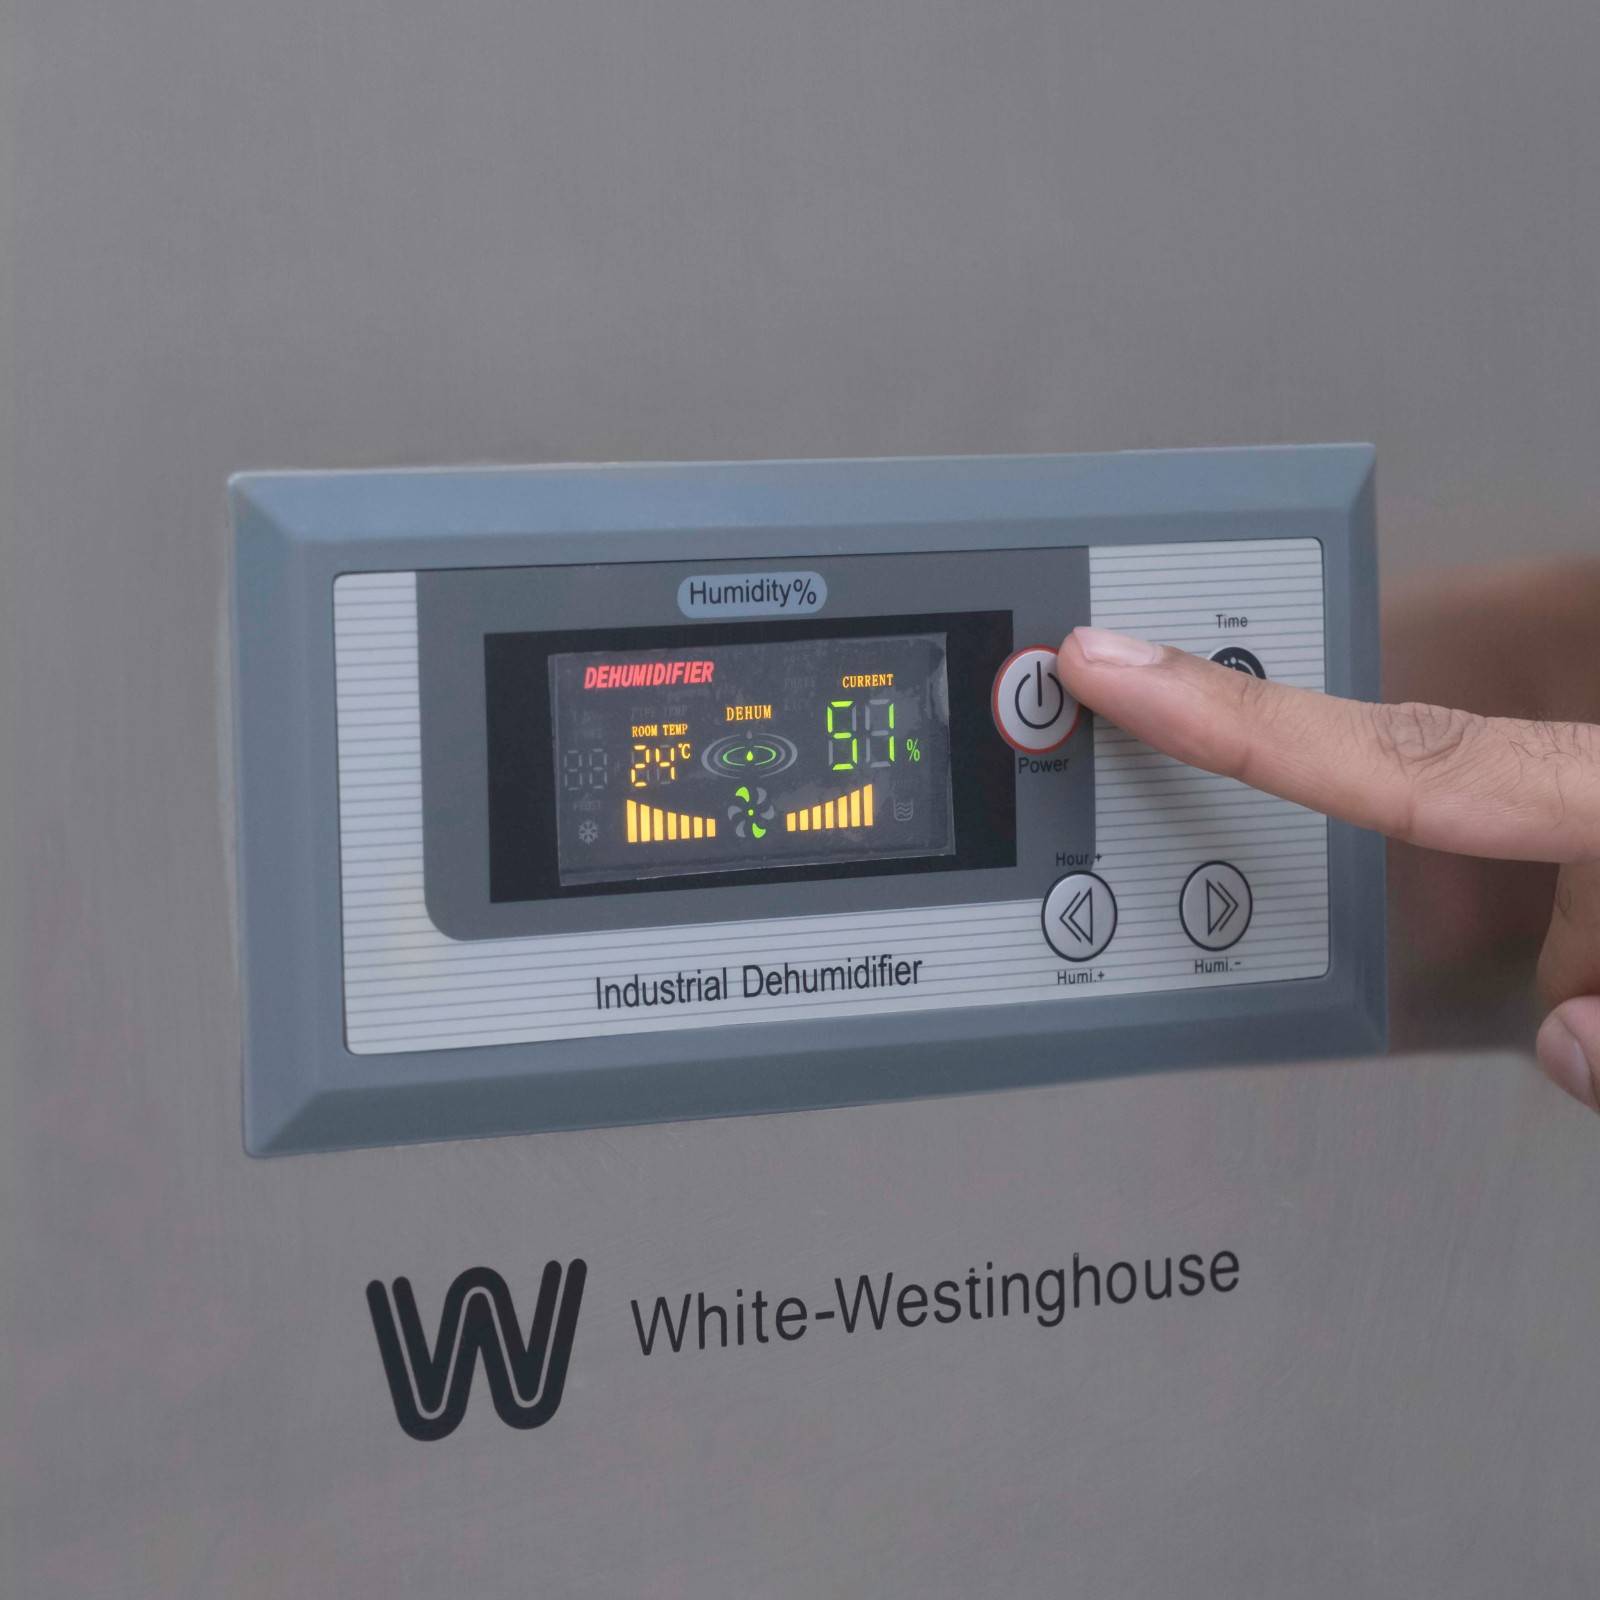 Close-up view of the digital control panel on the White Westinghouse Industrial Dehumidifier WDE168S, with a person's finger pressing the power button. The display shows various settings and indicators for humidity control, ensuring easy operation and precise adjustments. Ideal for maintaining optimal humidity levels in large commercial and industrial spaces.